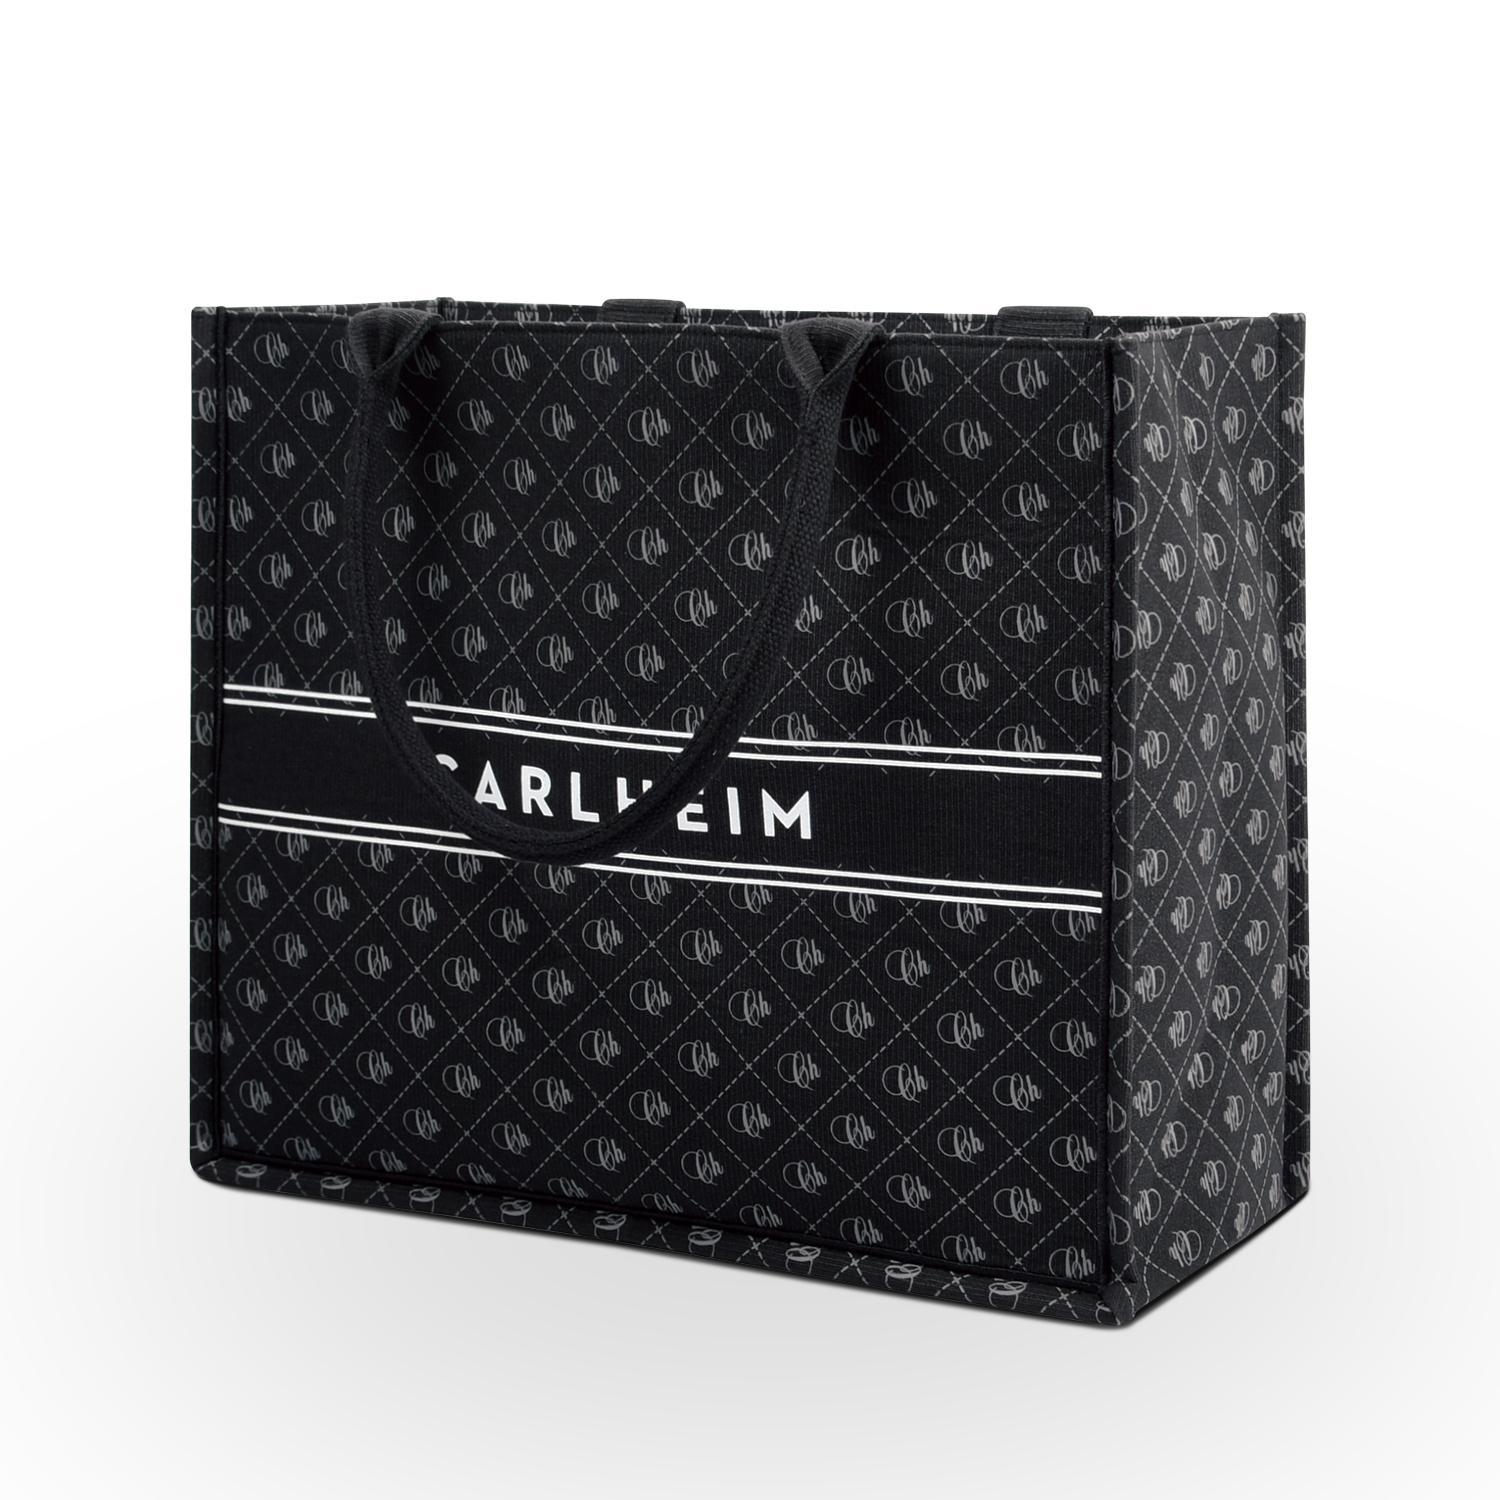 Women's bags - Tote bag Canvas Large (Black patterned) – Carlheim